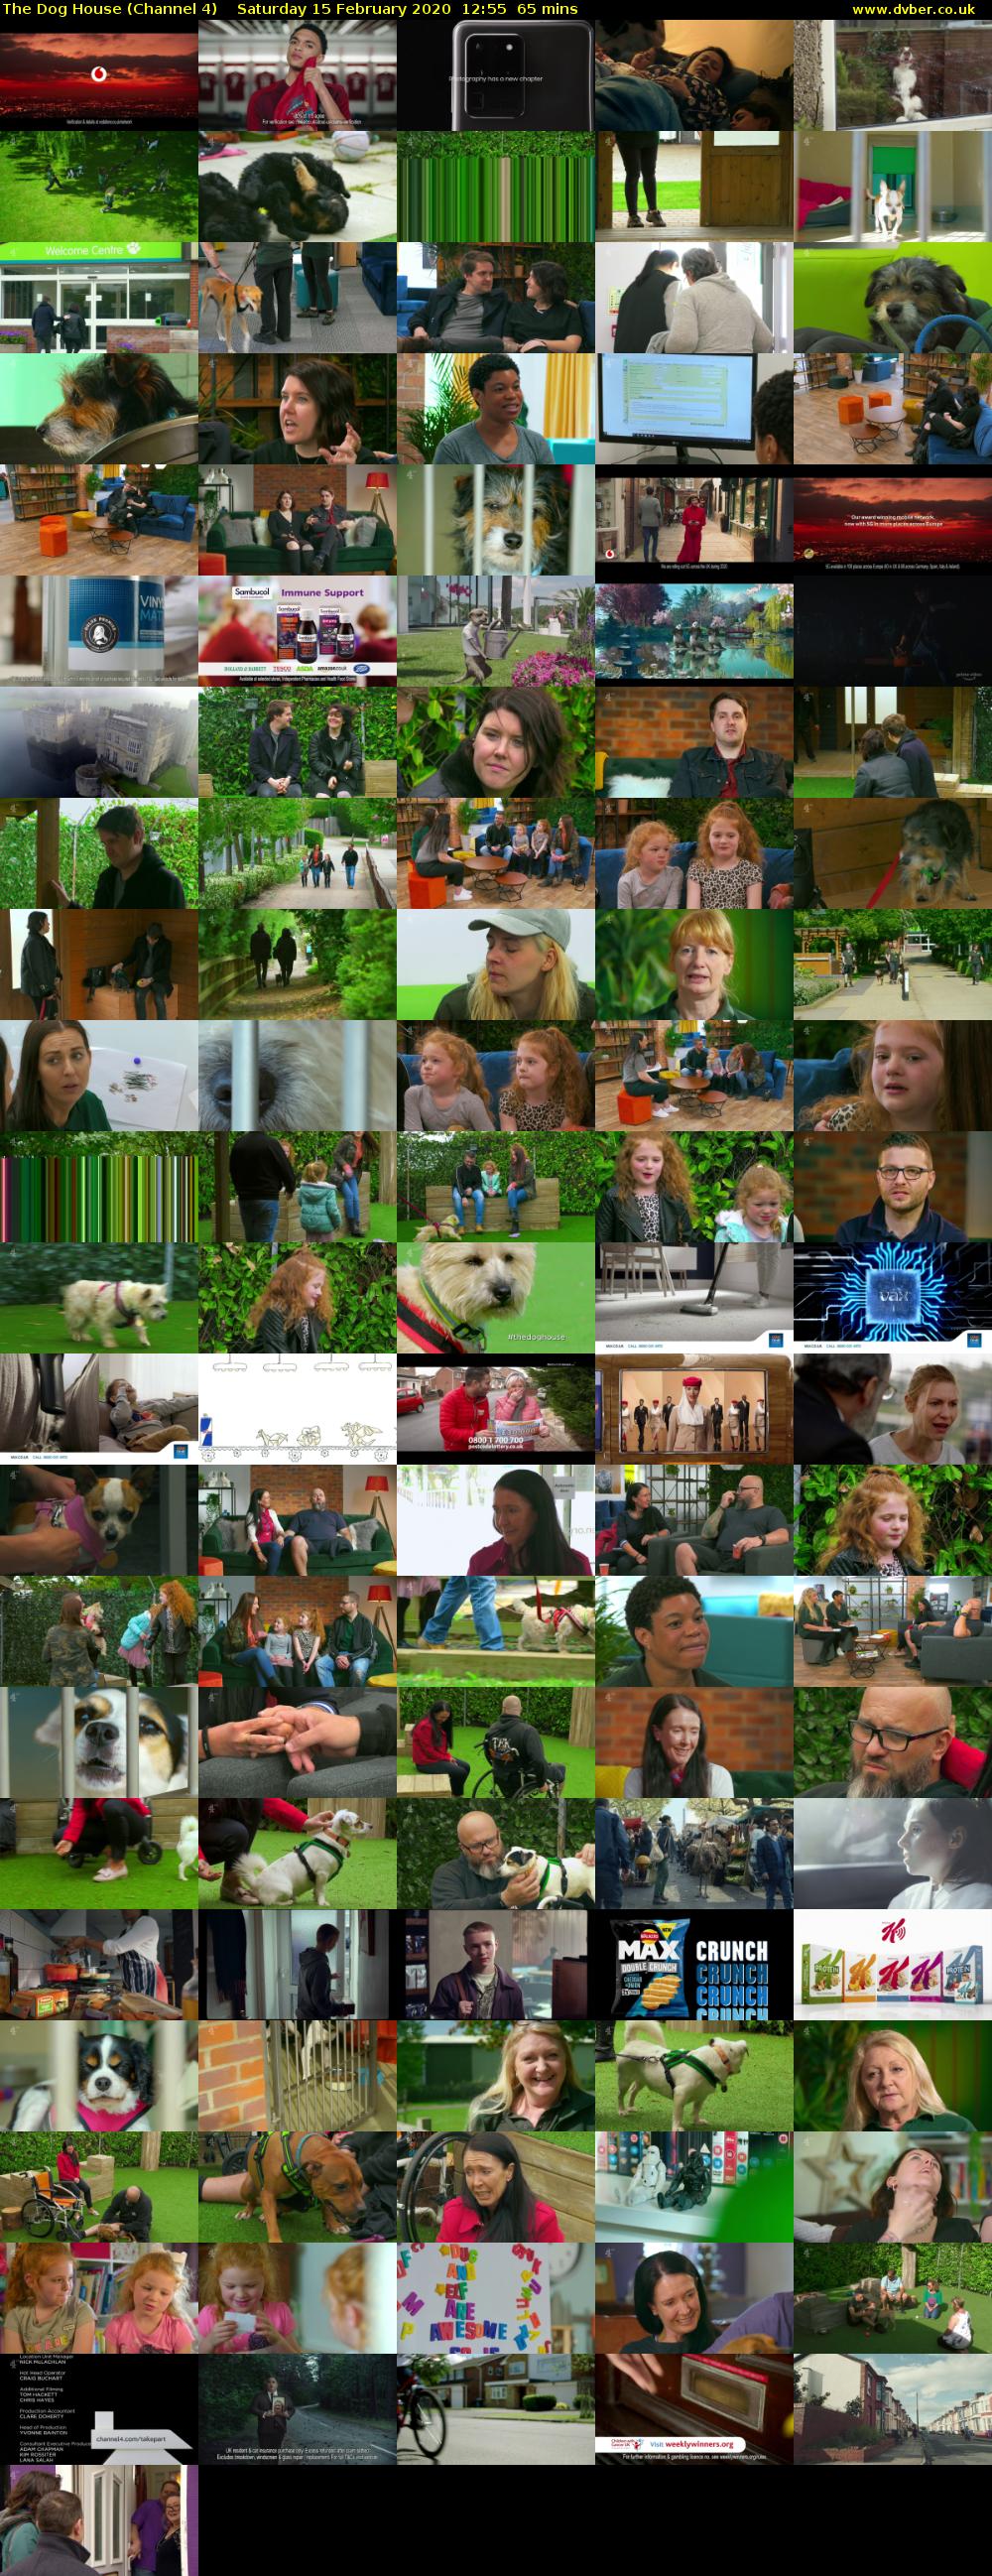 The Dog House (Channel 4) Saturday 15 February 2020 12:55 - 14:00